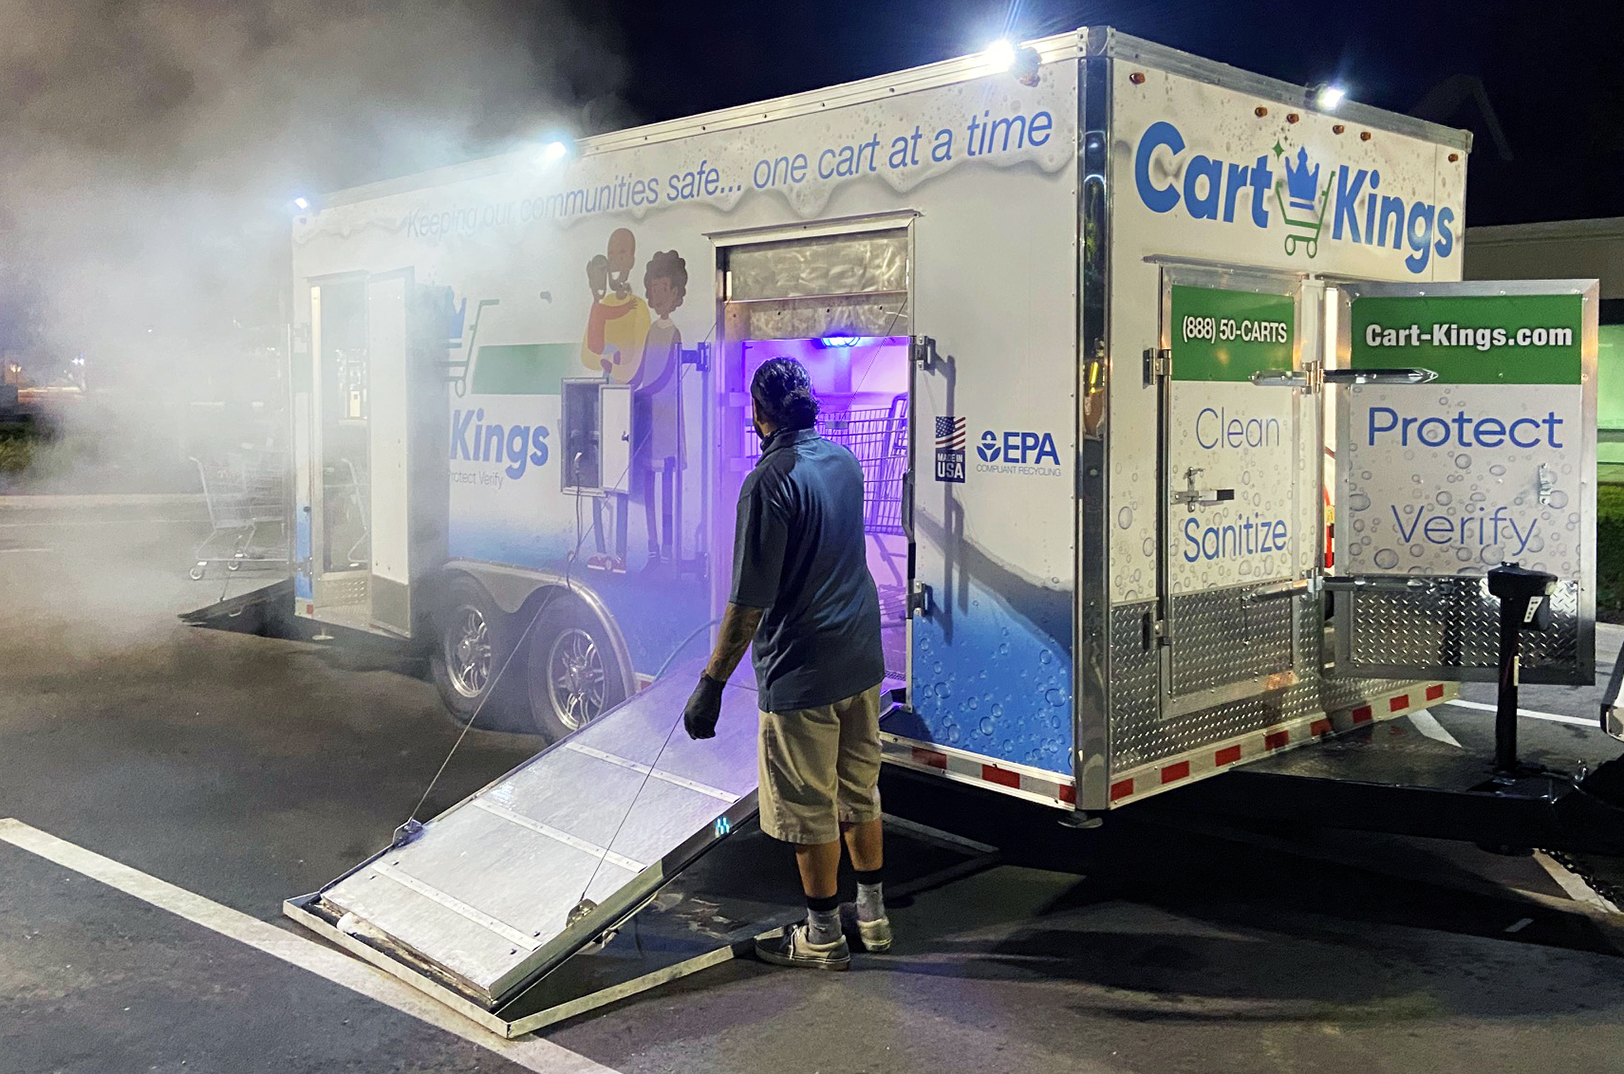 Safe and sanitized: Cart Kings corral COVID threat with three dads’ protective solution